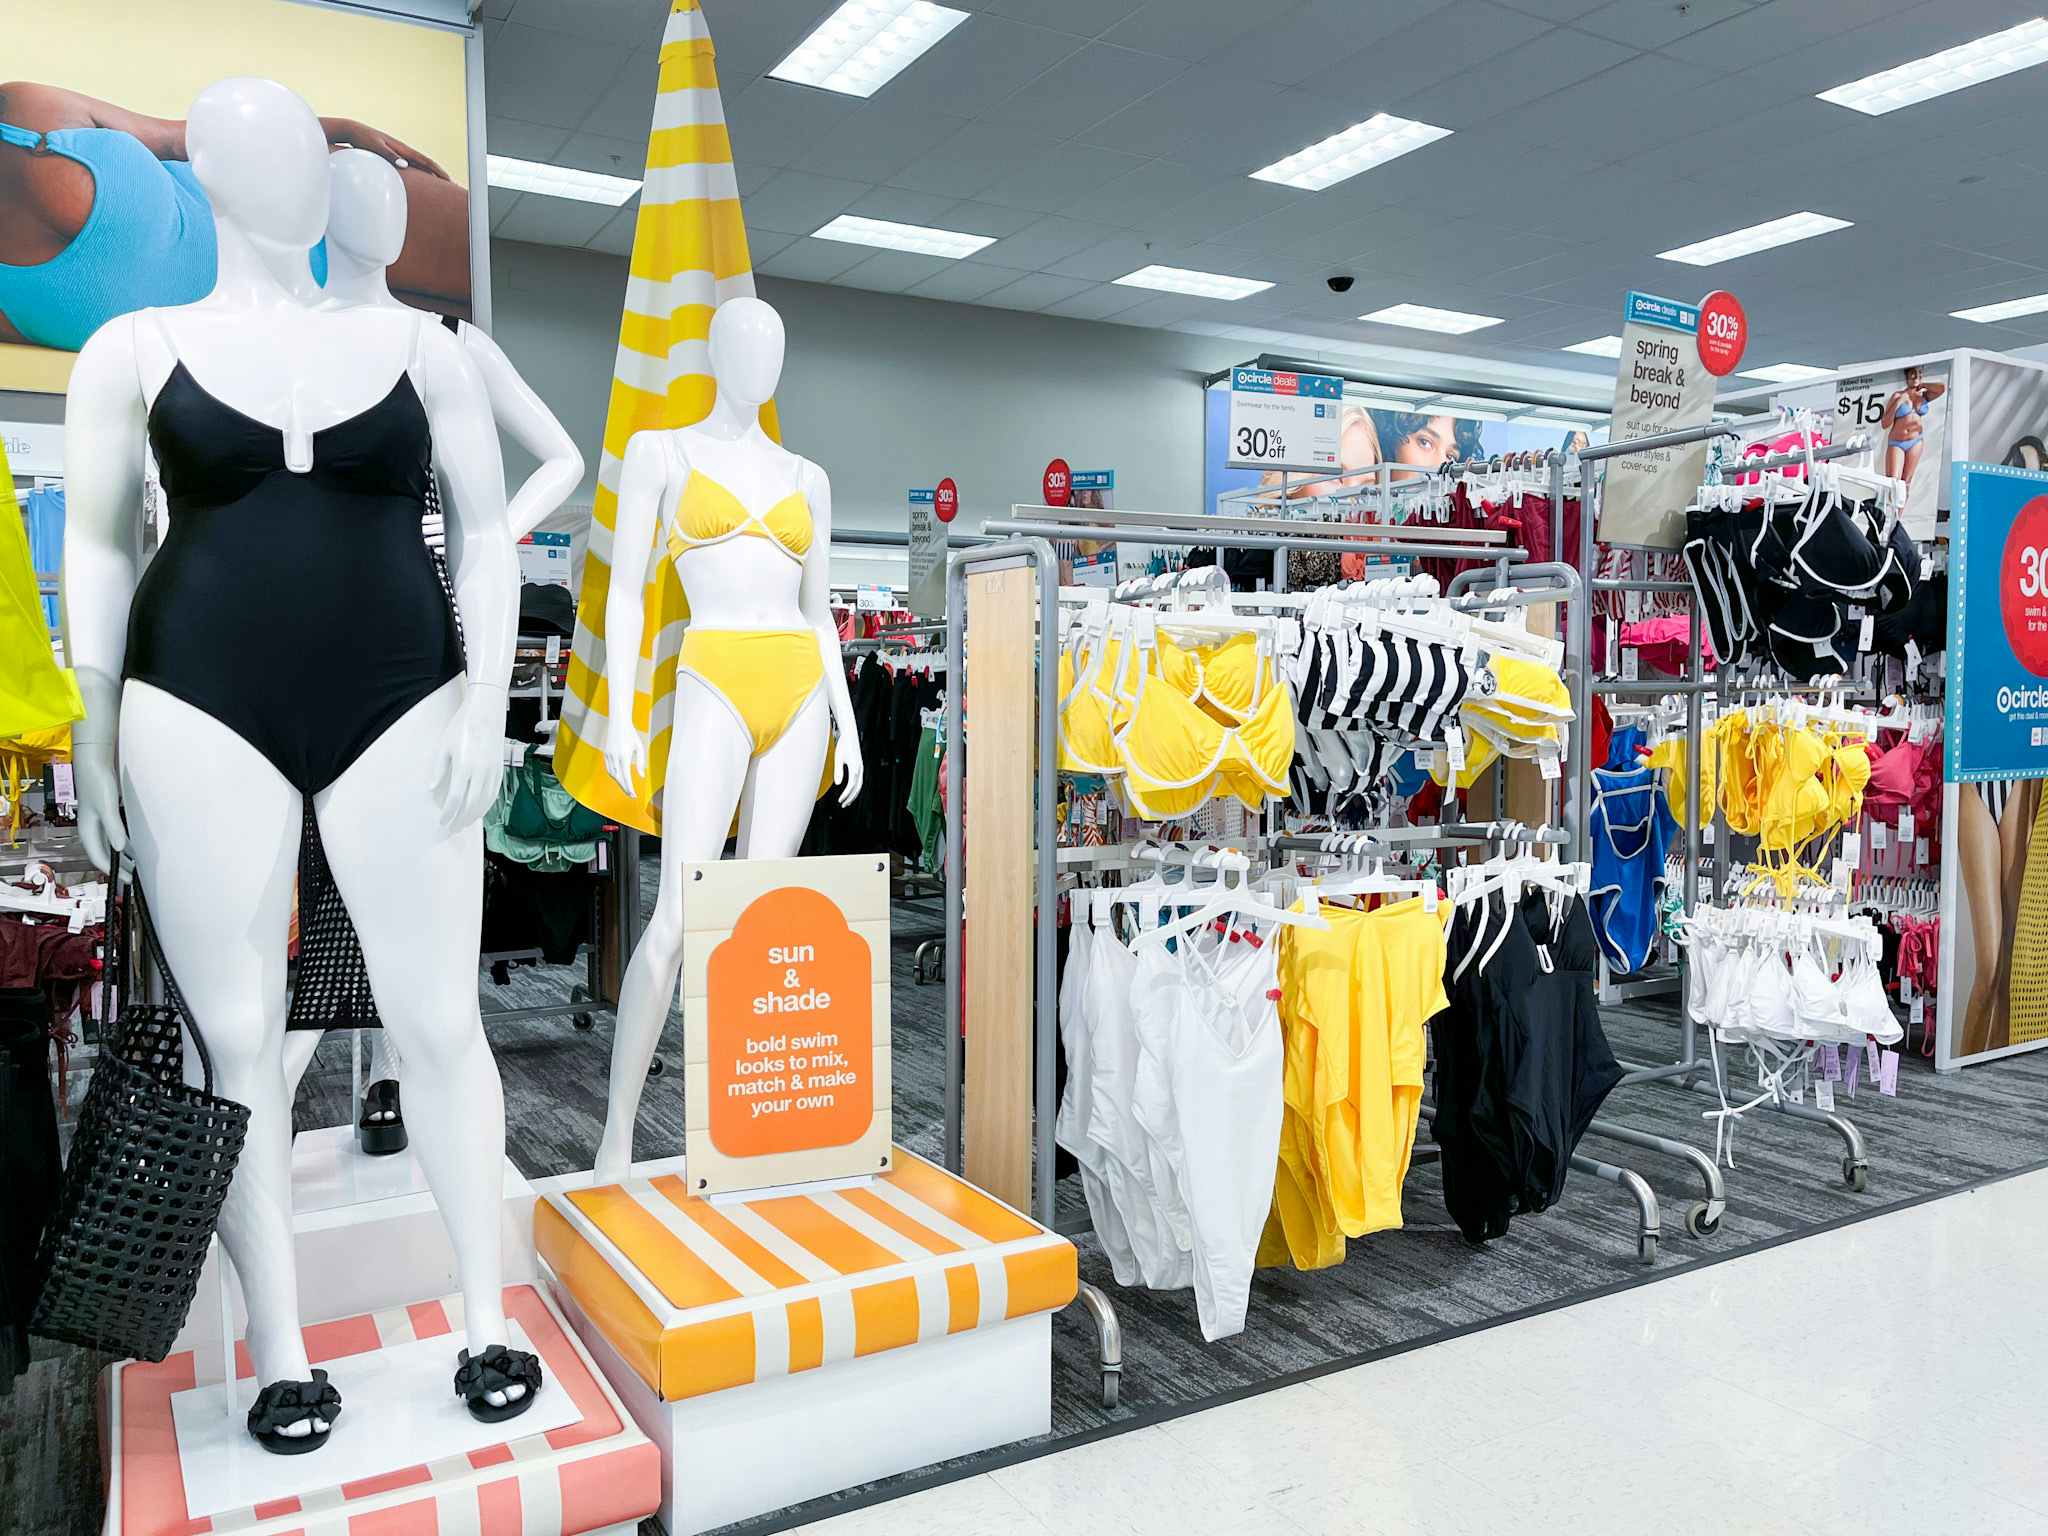 Women's Swimwear on Sale at Target: $7 Tops, $8 Bottoms, and $13 One-Pieces